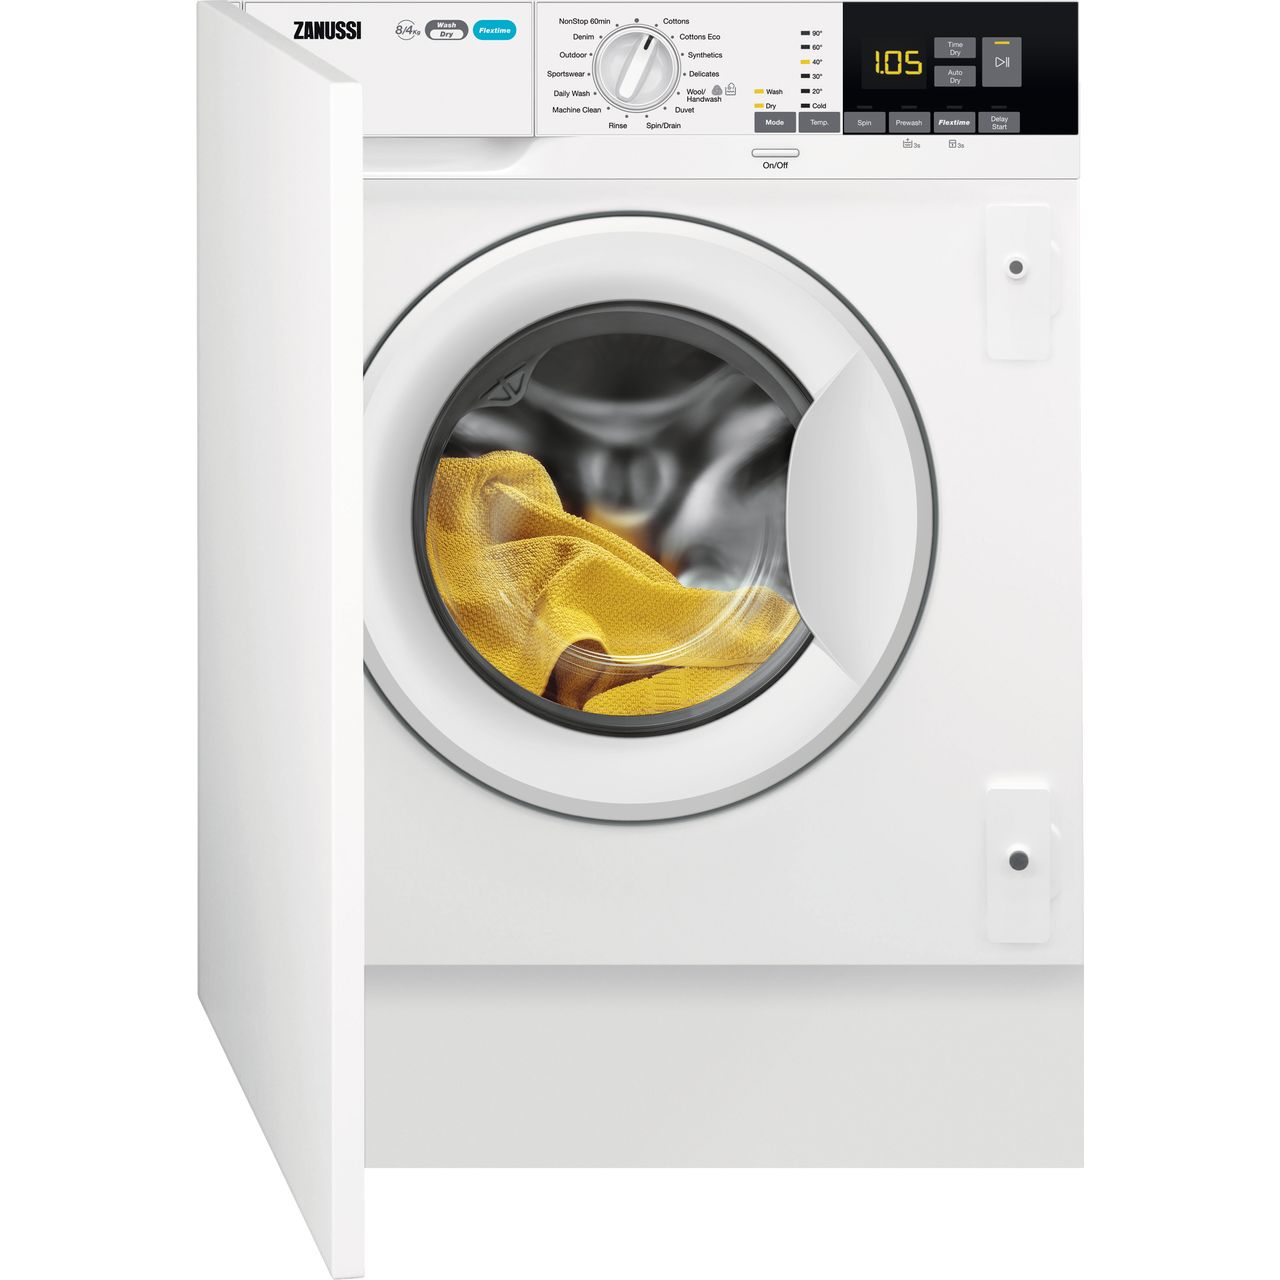 Zanussi Z816WT85BI Integrated 8Kg / 4Kg Washer Dryer with 1600 rpm Review